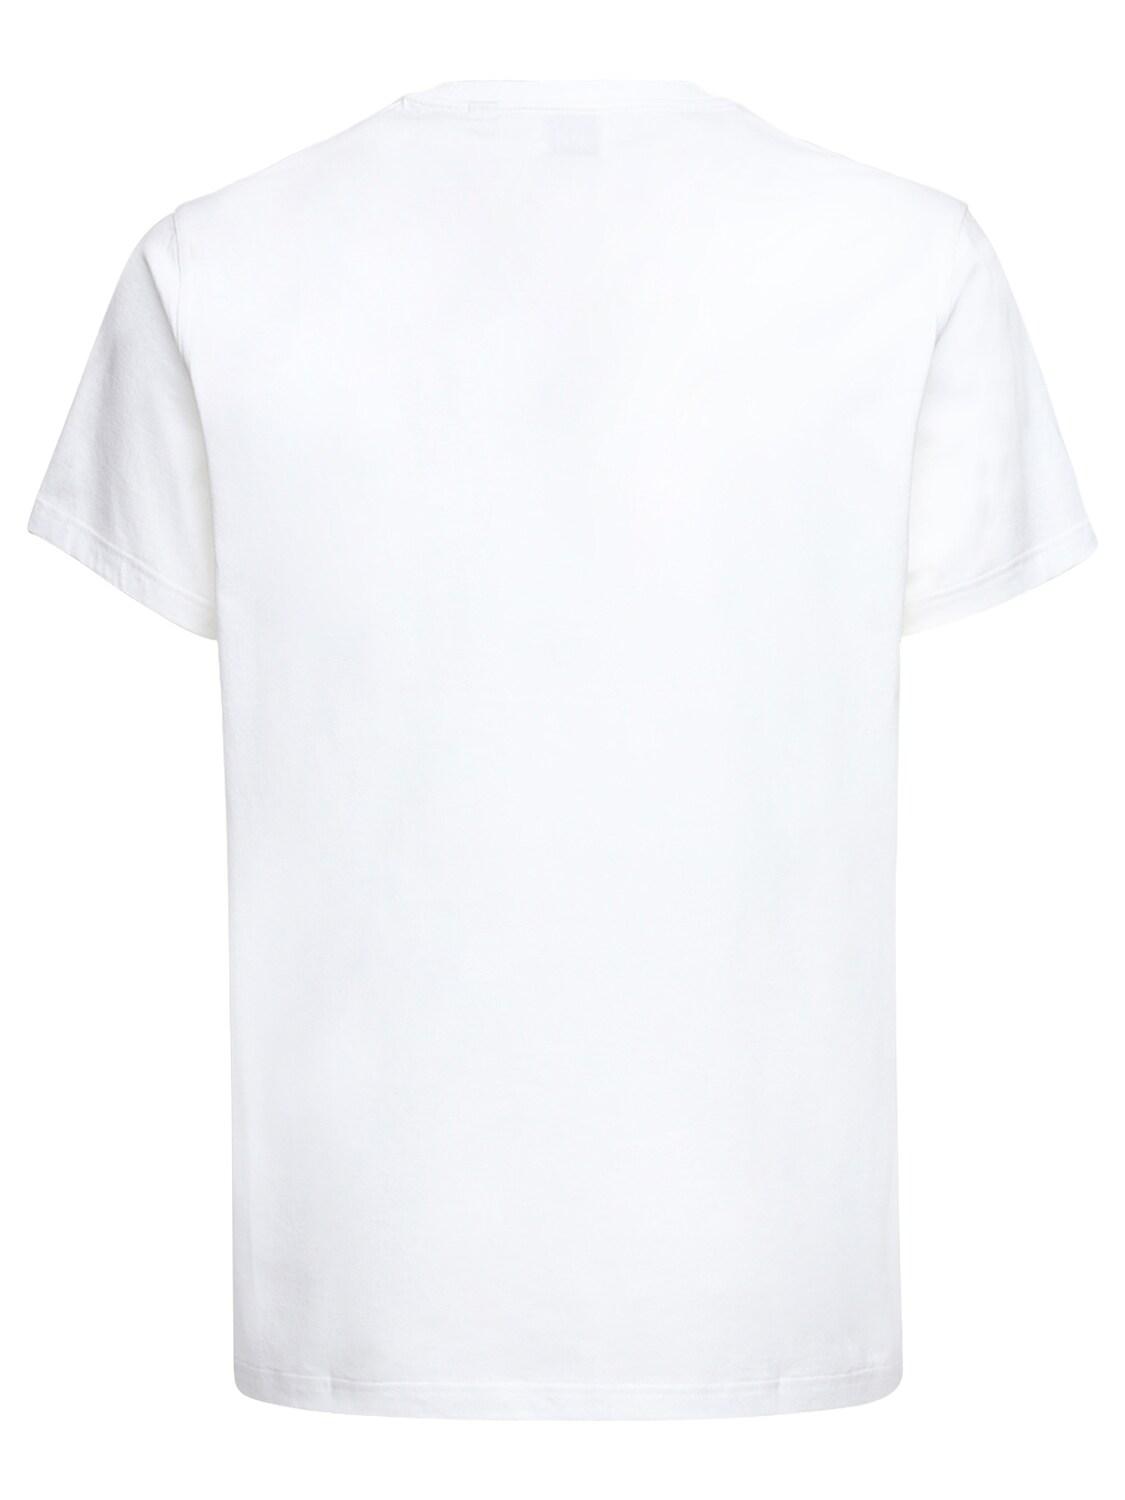 Burberry Tb Logo Embroidery Cotton Jersey T-shirt in White for Men 